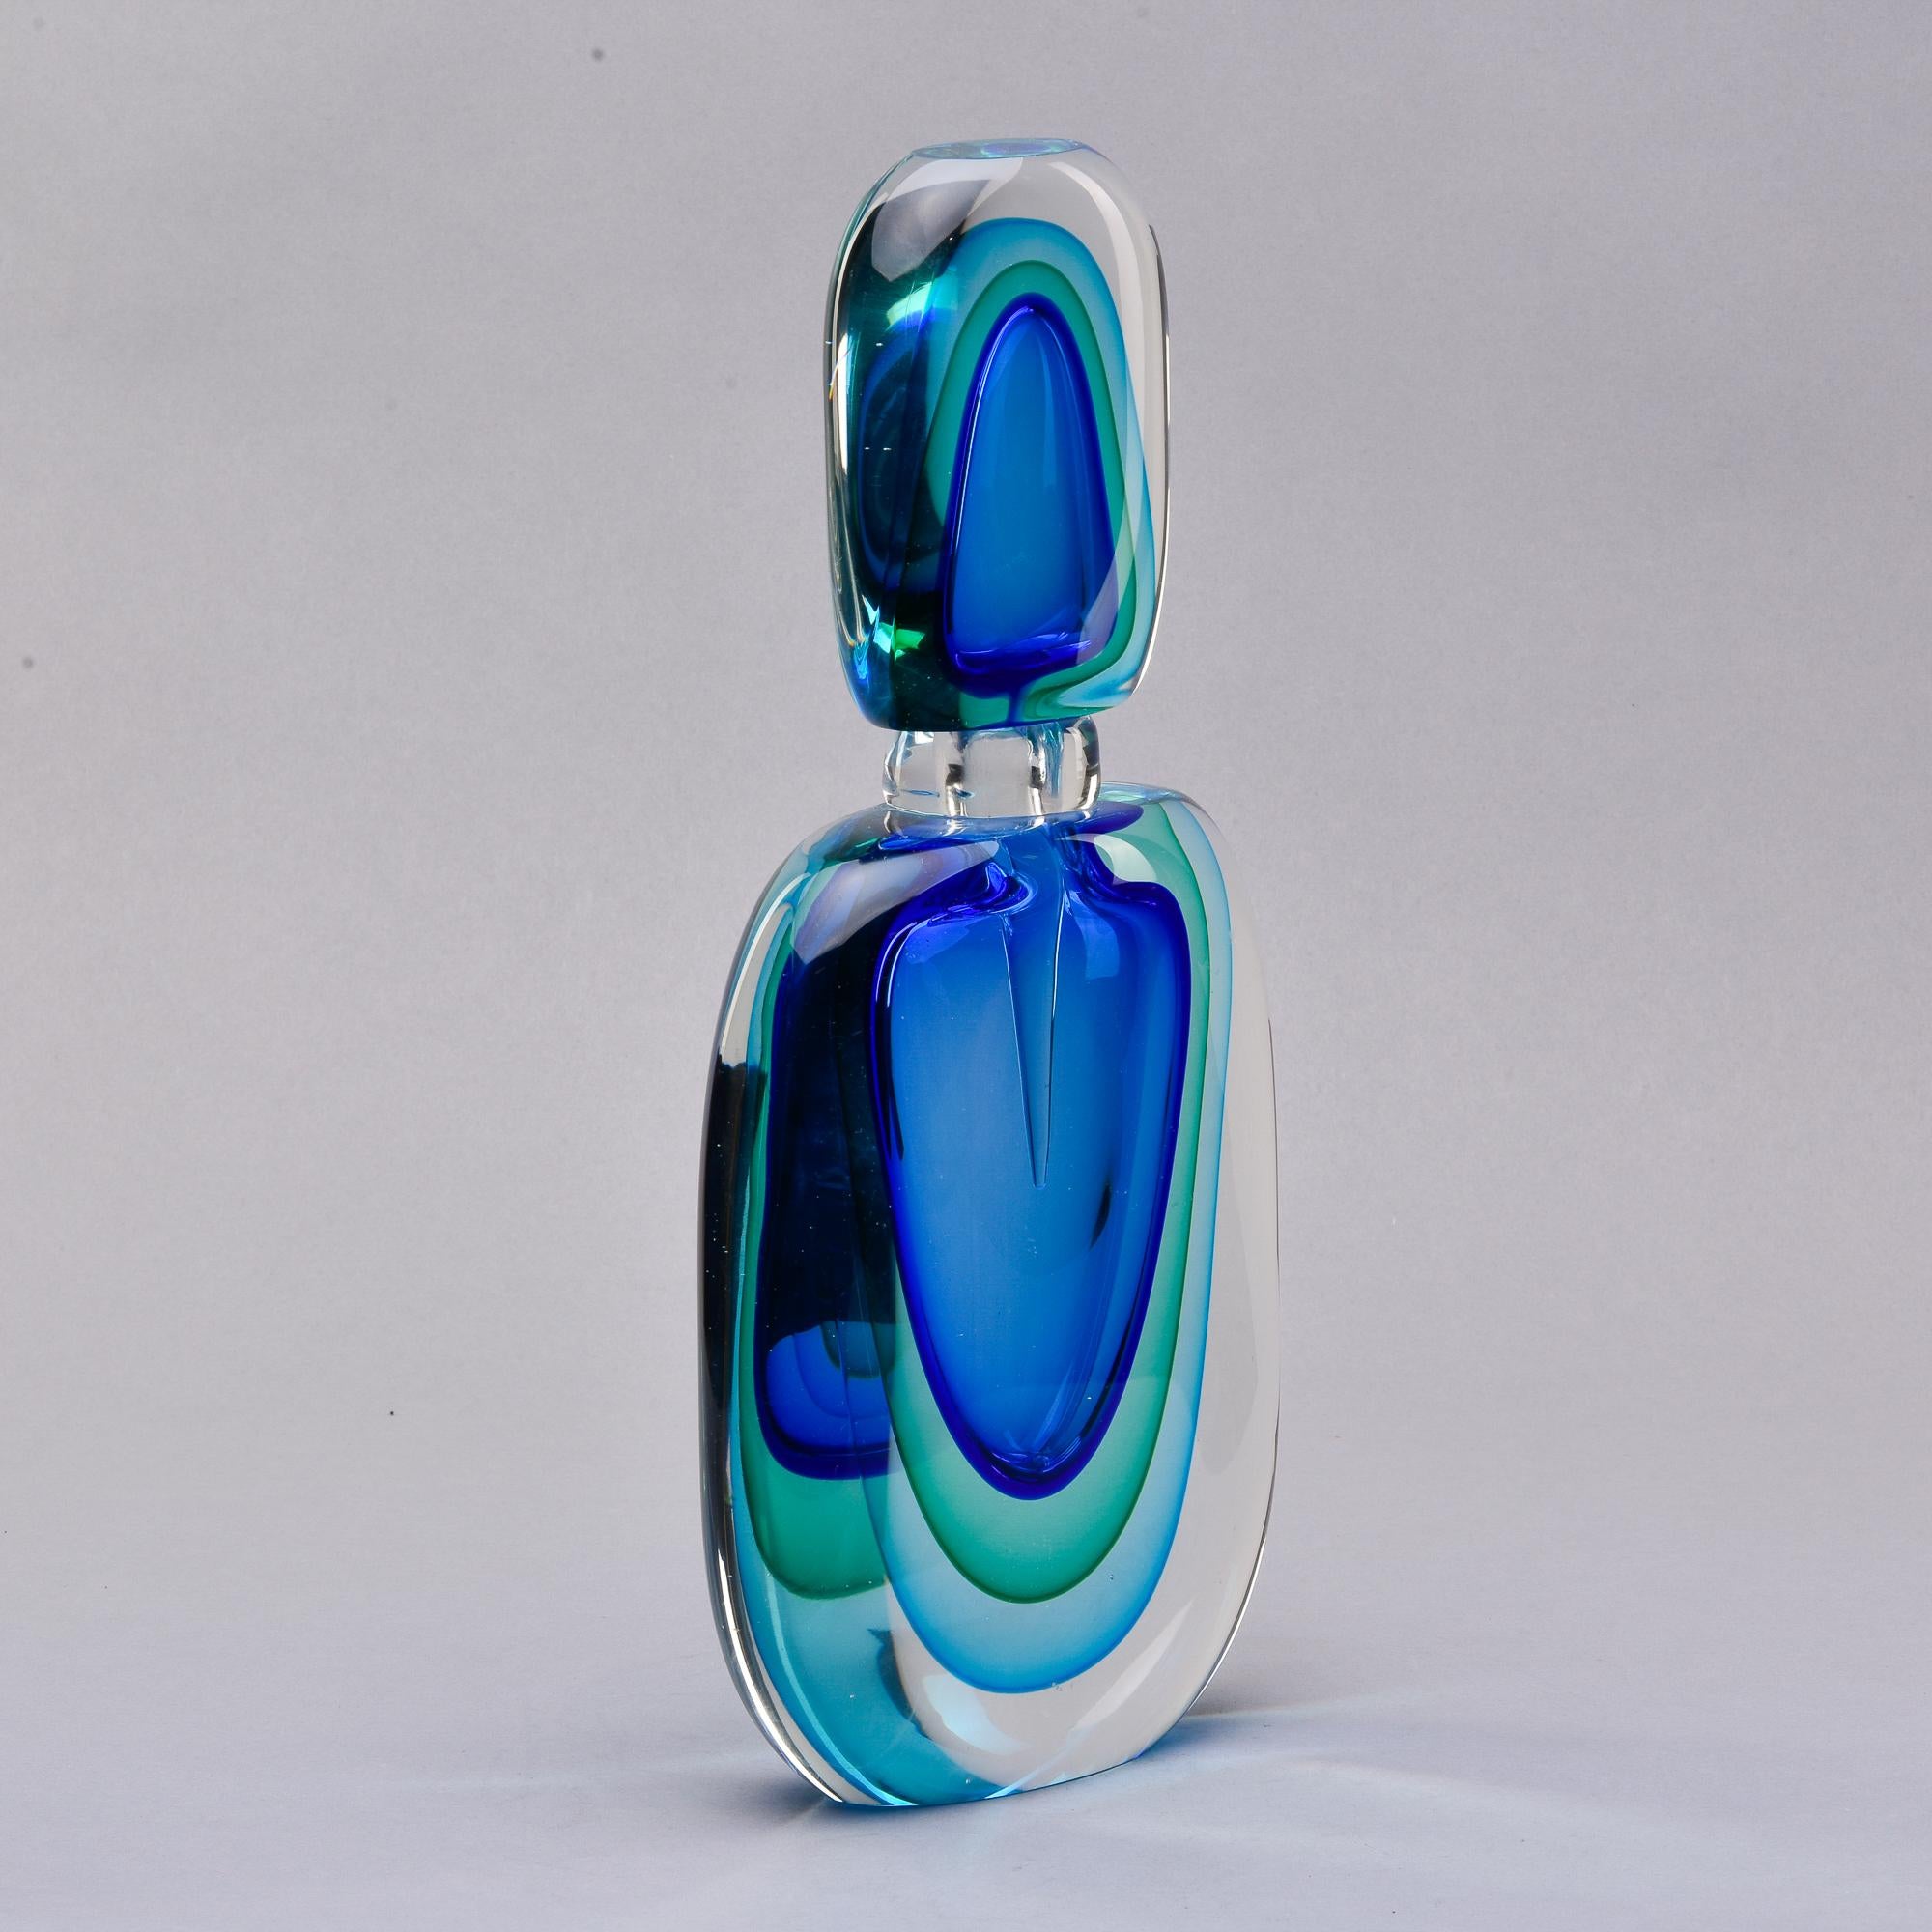 New 14” Tall Murano Glass Sommerso Blue and Green Perfume Bottle 1